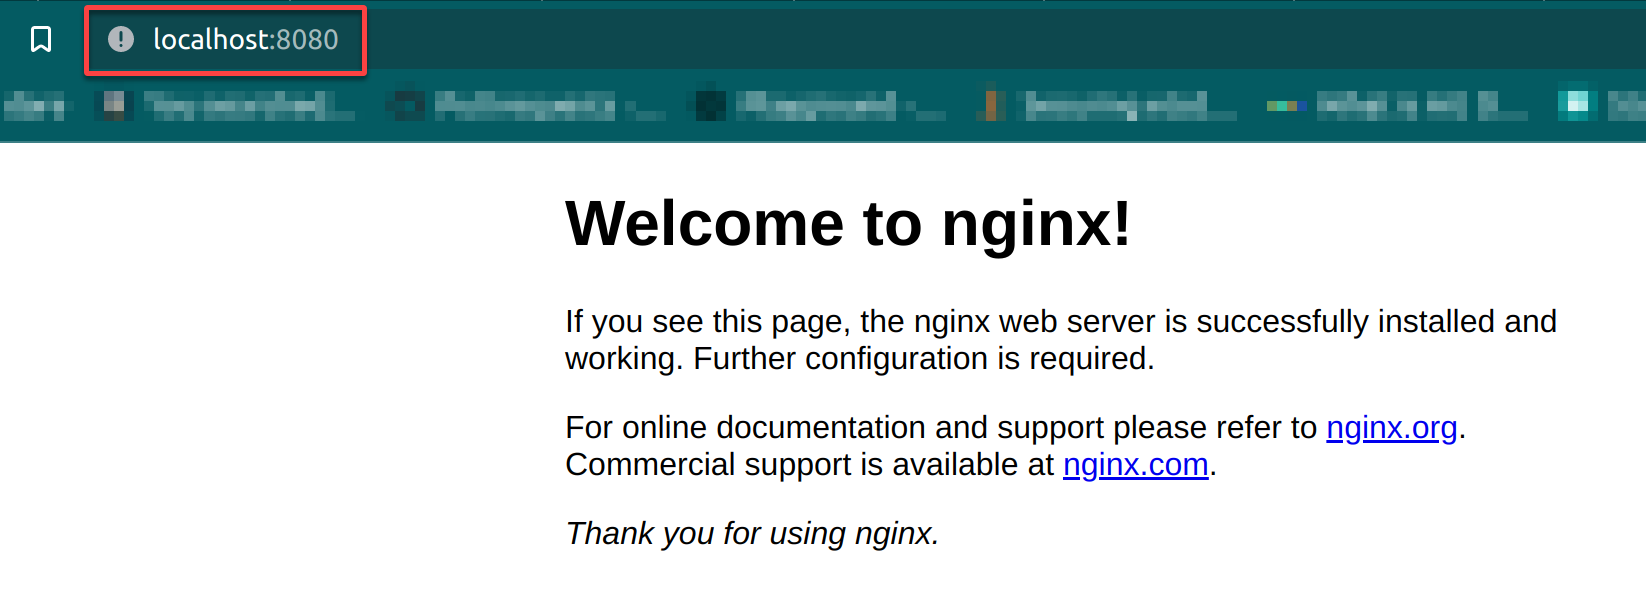 Accessing the NGINX welcome page on port 8080